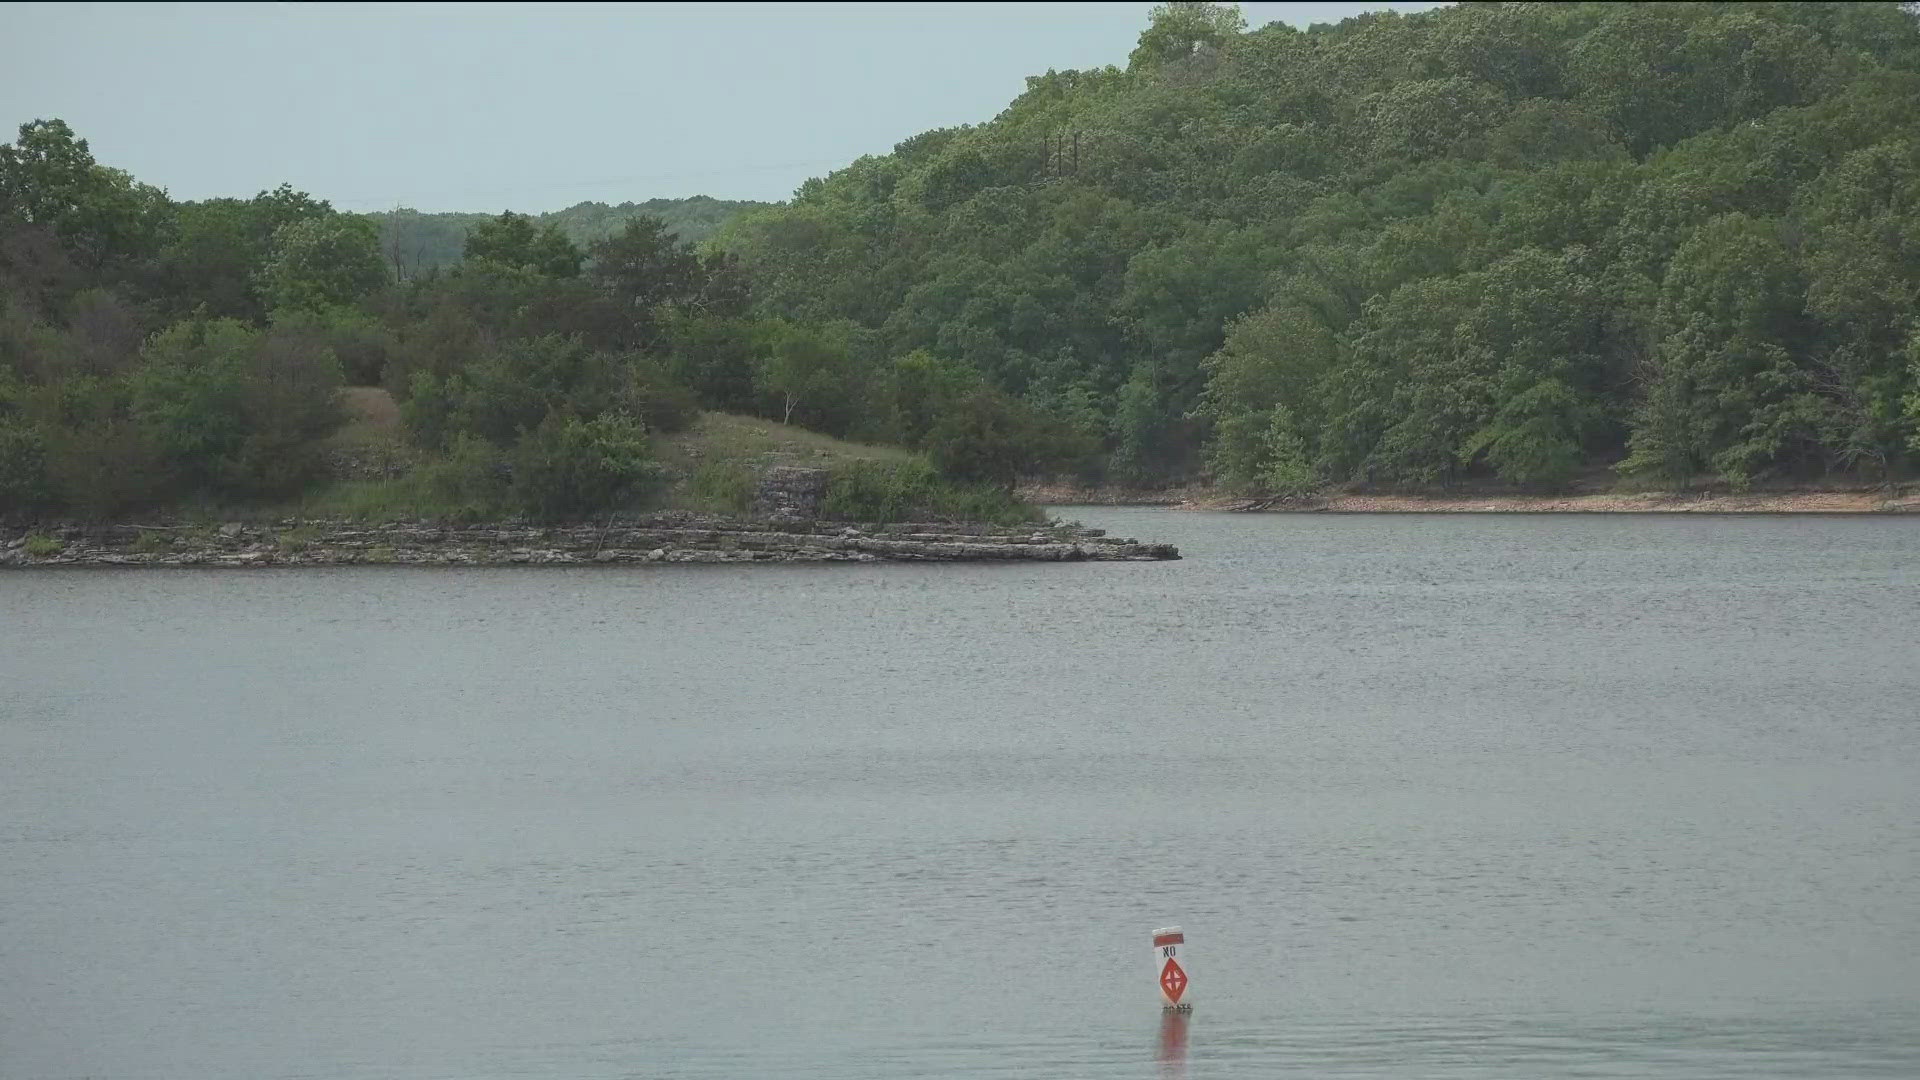 Officials want campers to stay safe through waves of severe weather on Beaver Lake. Ten of the 12 swimming beaches are closed but could open with new tests.